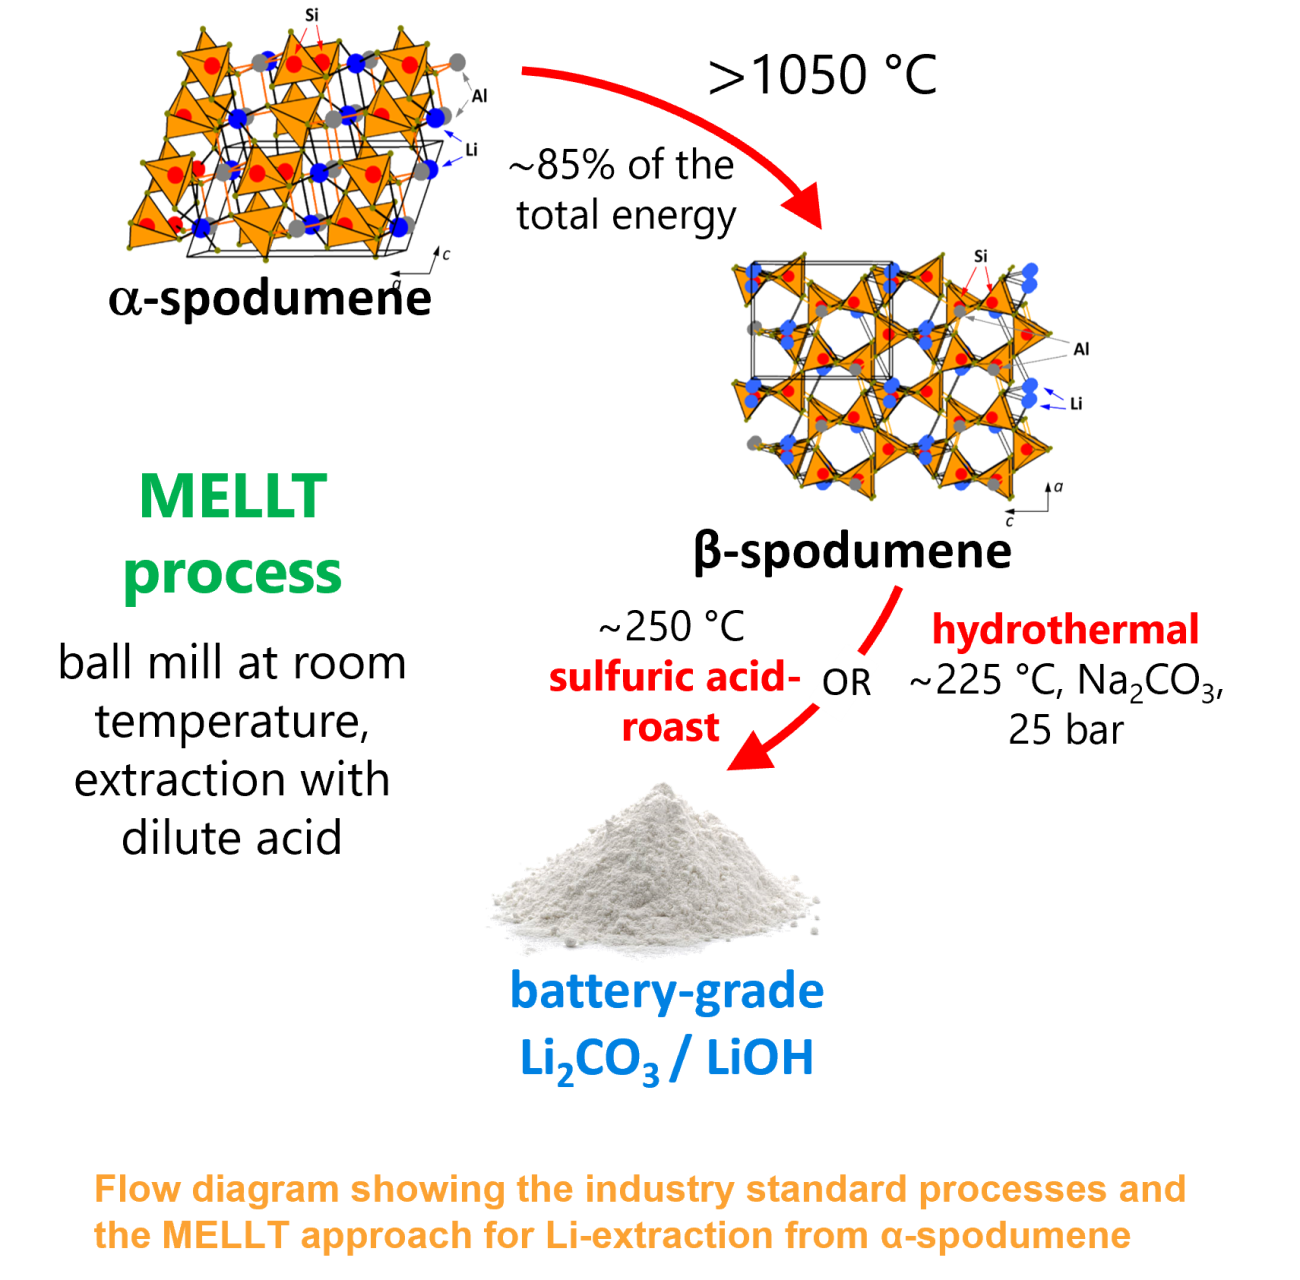 Flow diagram showing the industry standard processes and the MELLT approach for Li-extraction from α-spodumene